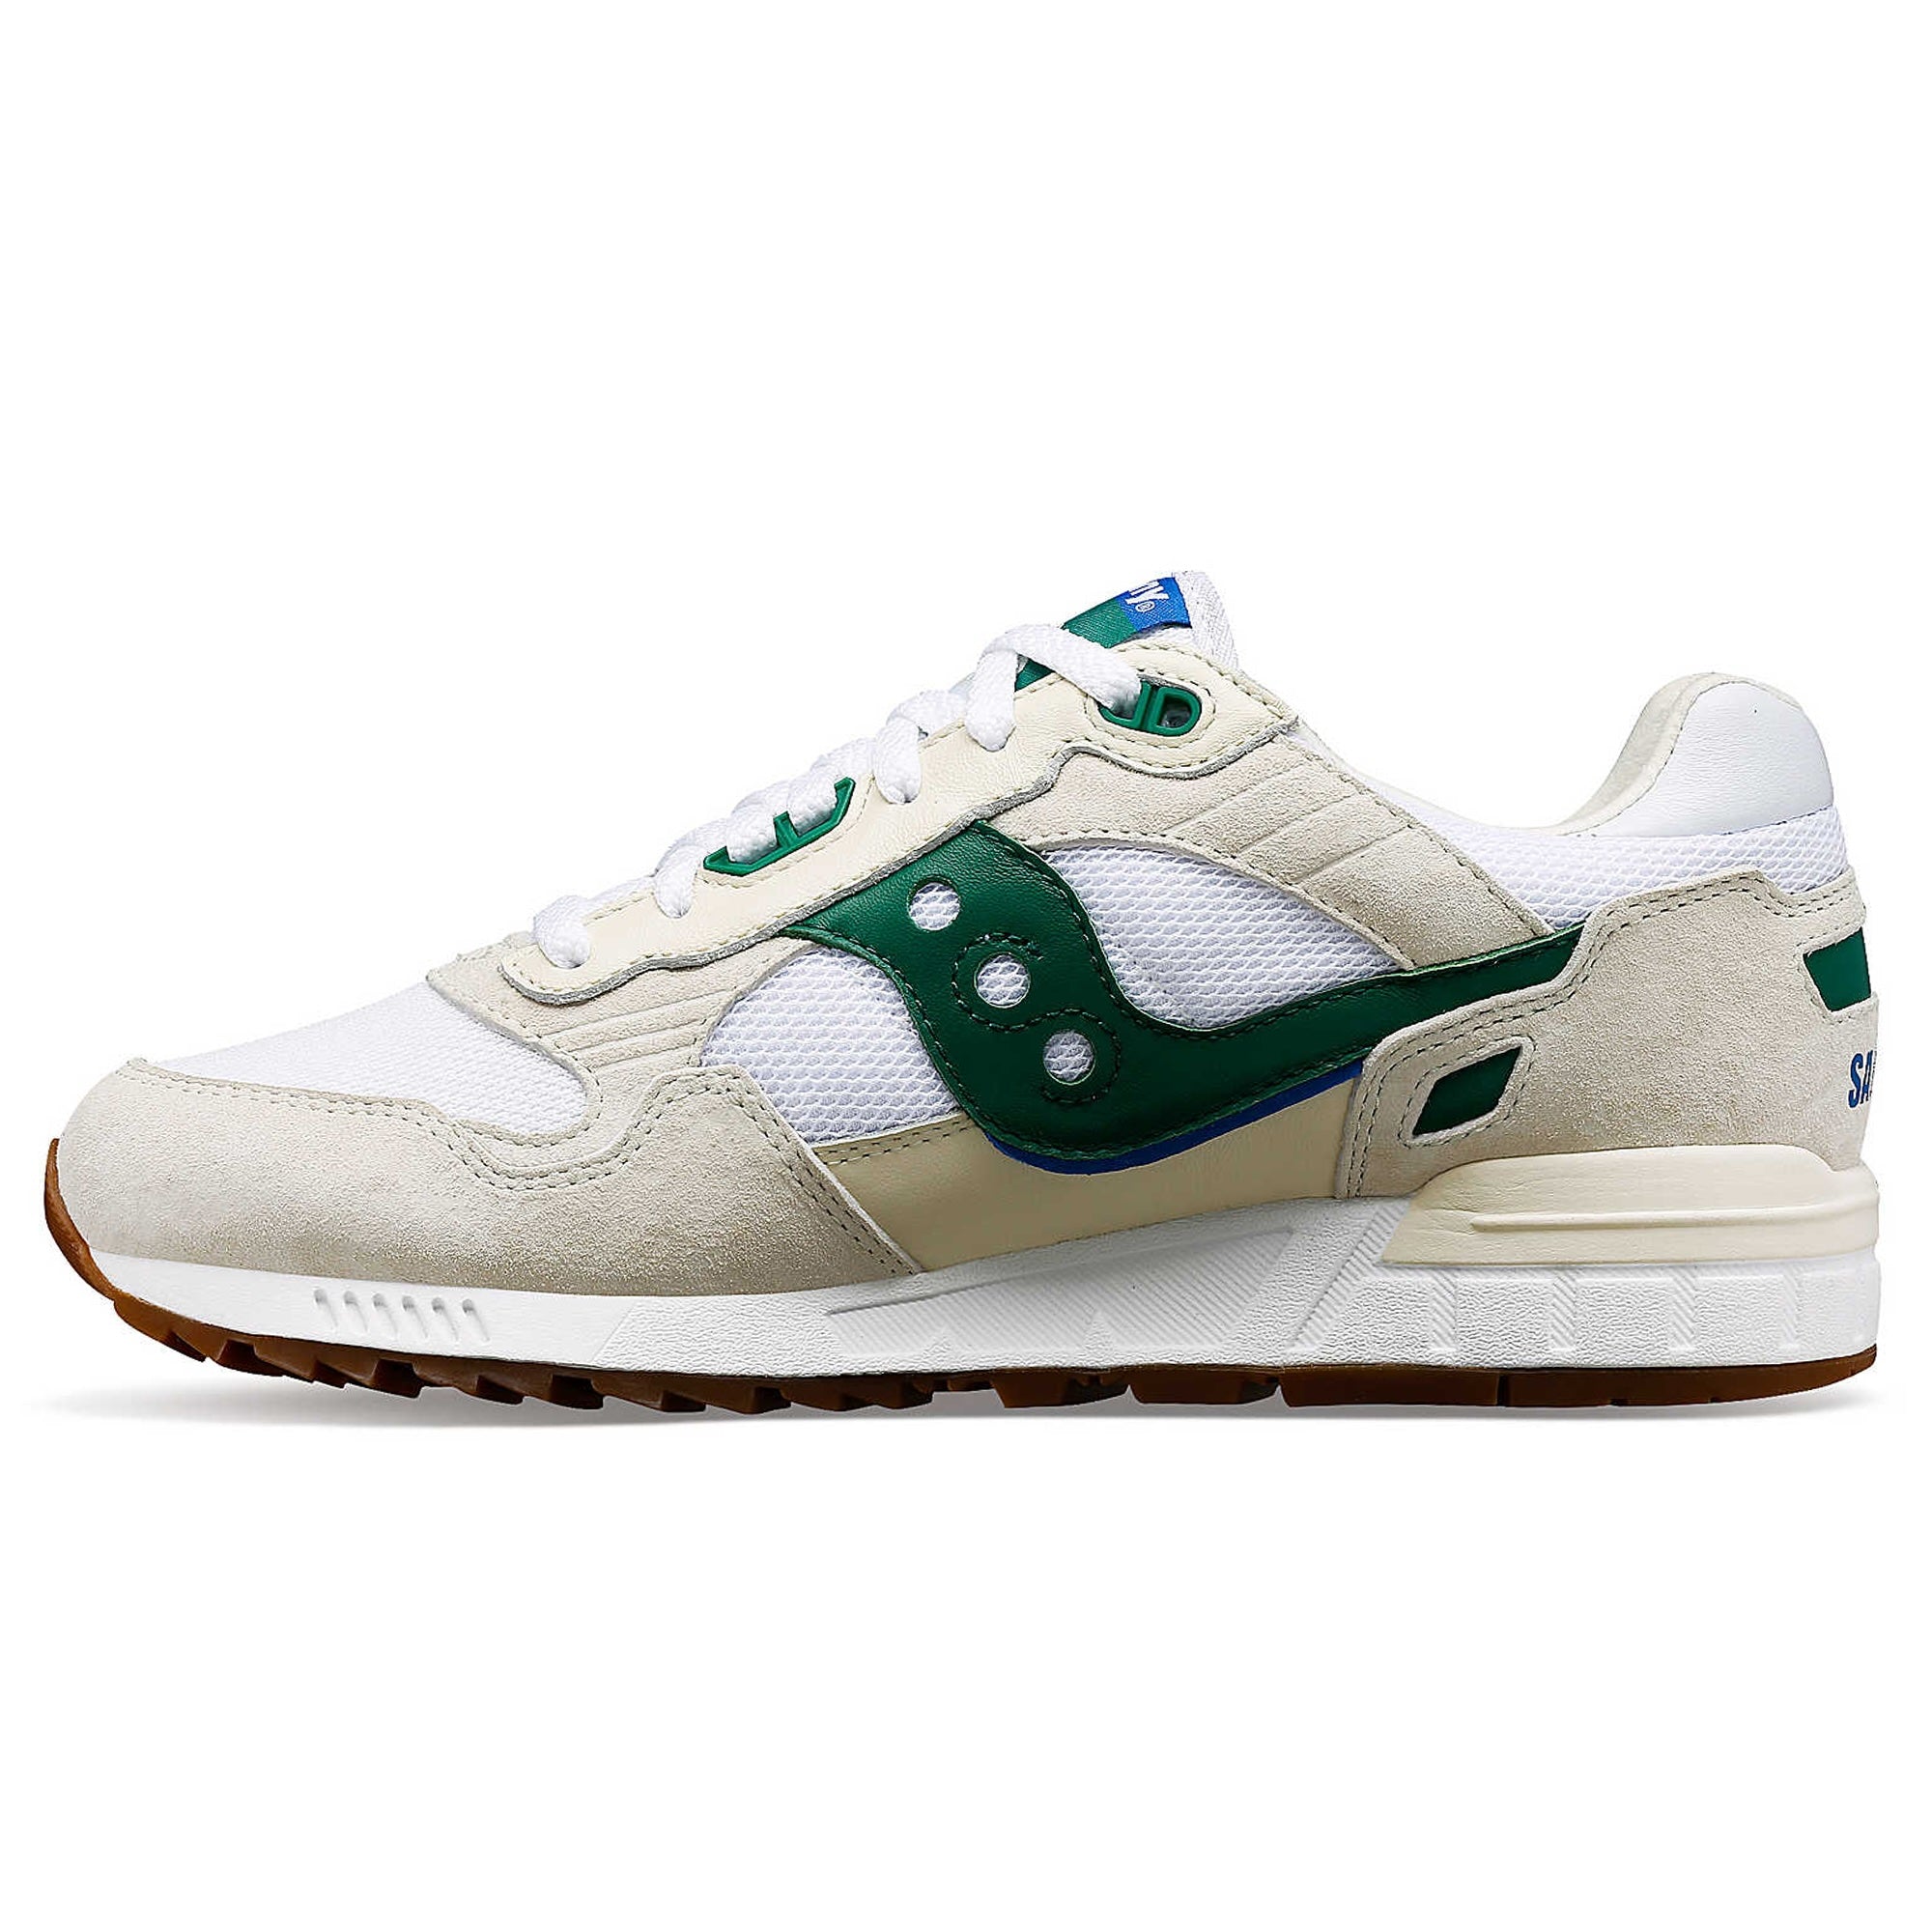 Saucony Shadow 5000 Premium "Ivy Prep Pack" Trainers - White/Green